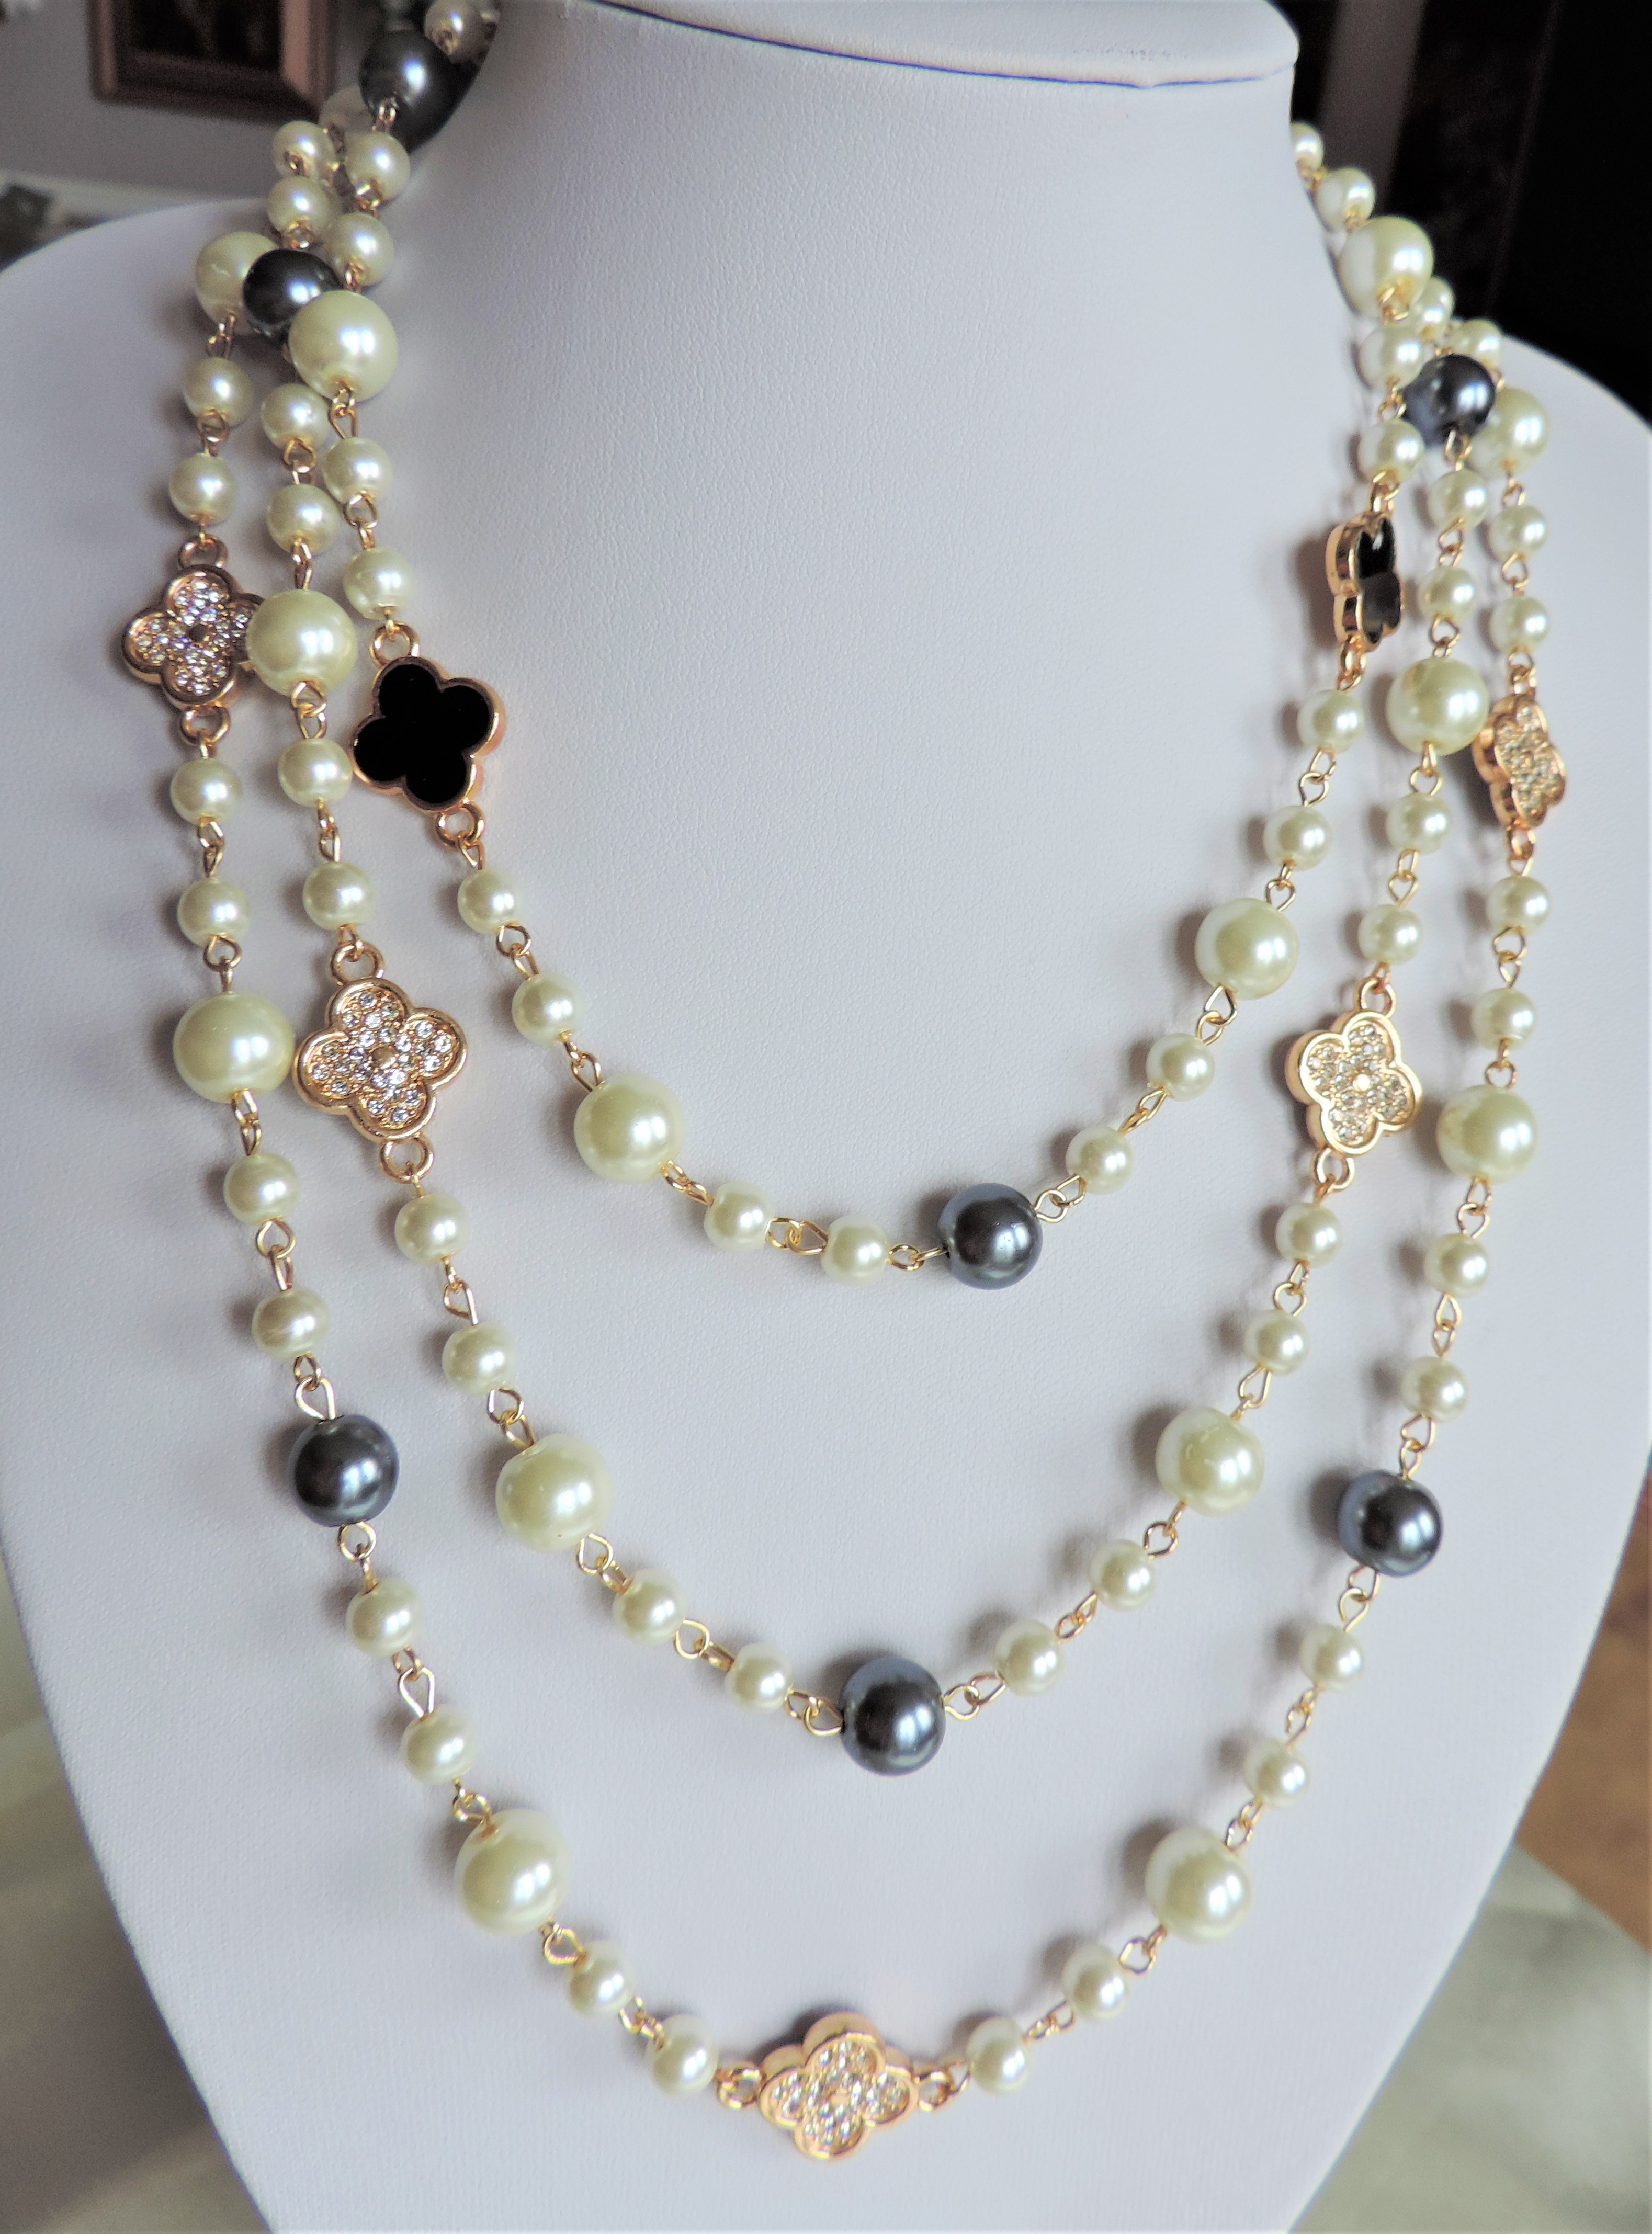 60 inch Pearl Enamel & Crystal Necklace - Image 2 of 5